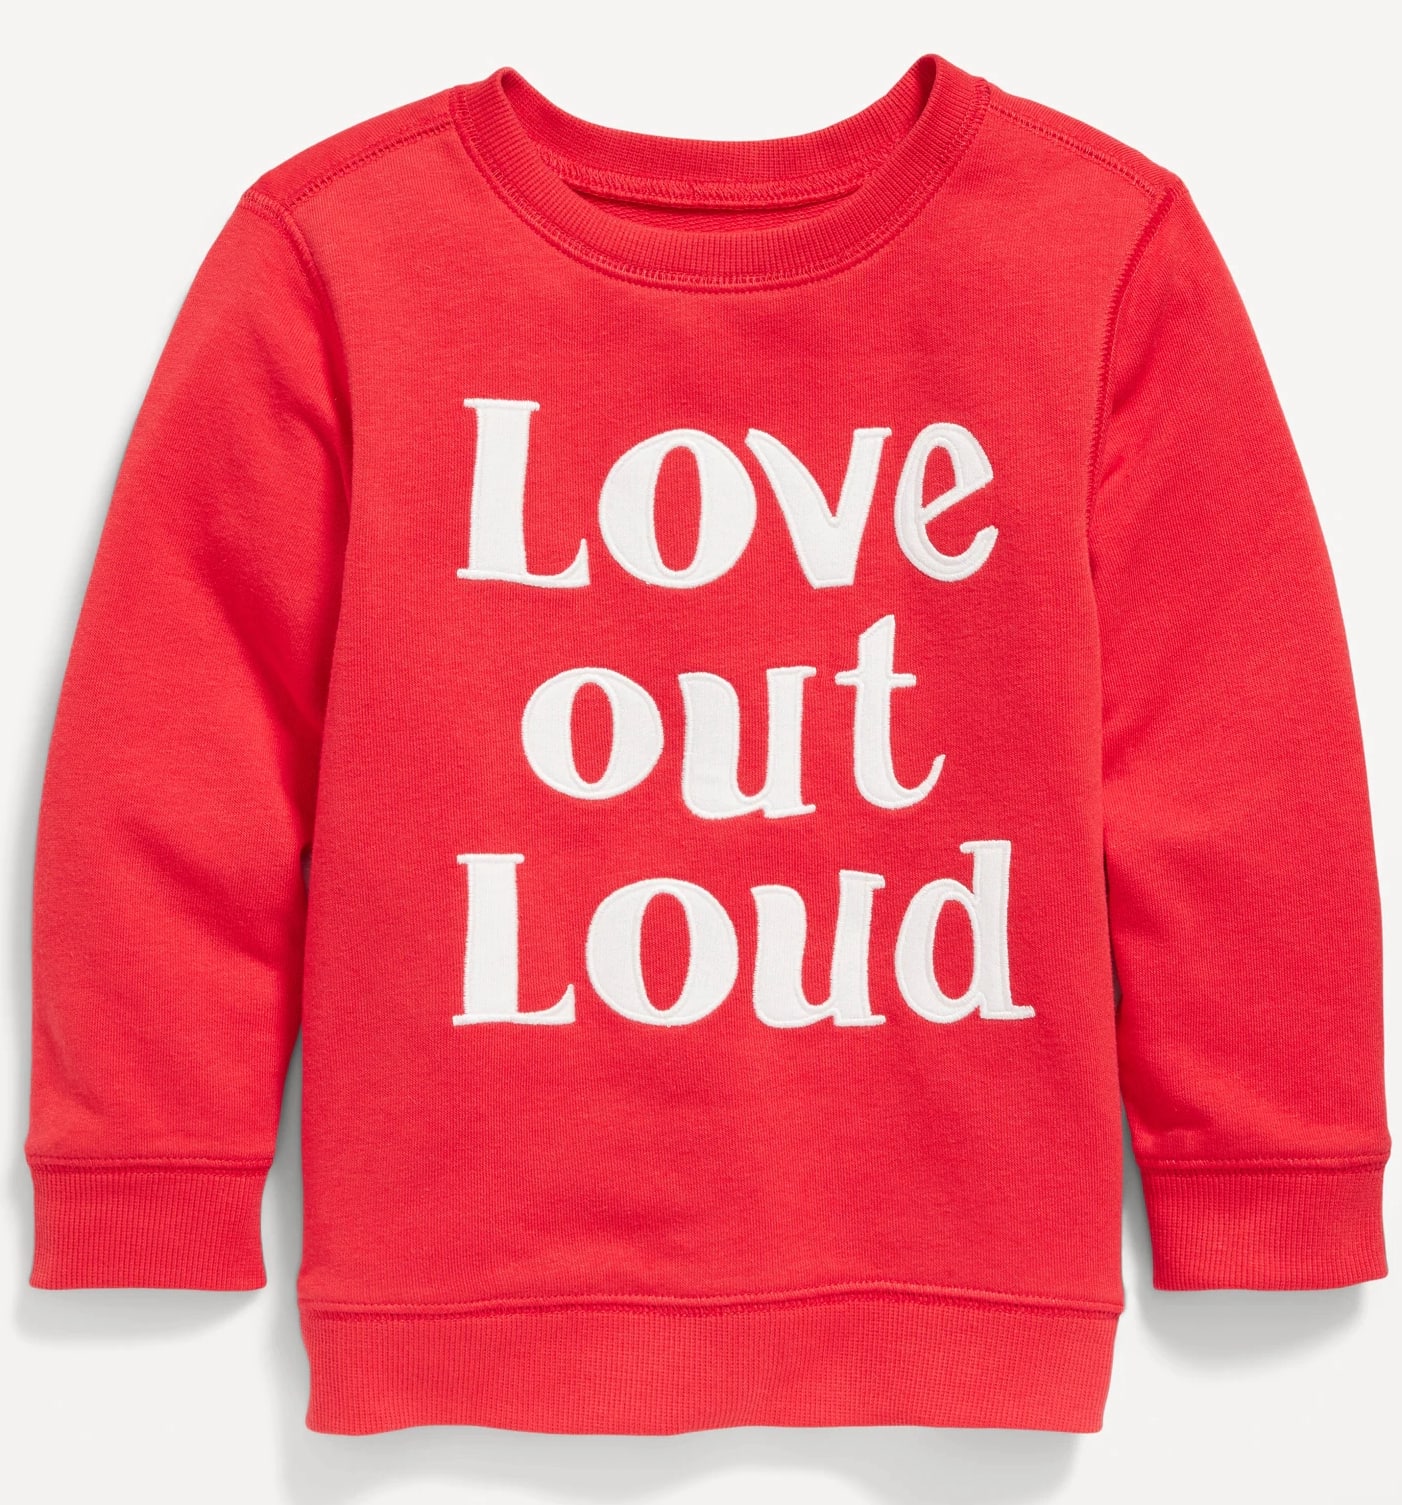 Red sweatshirt that says love out loud 